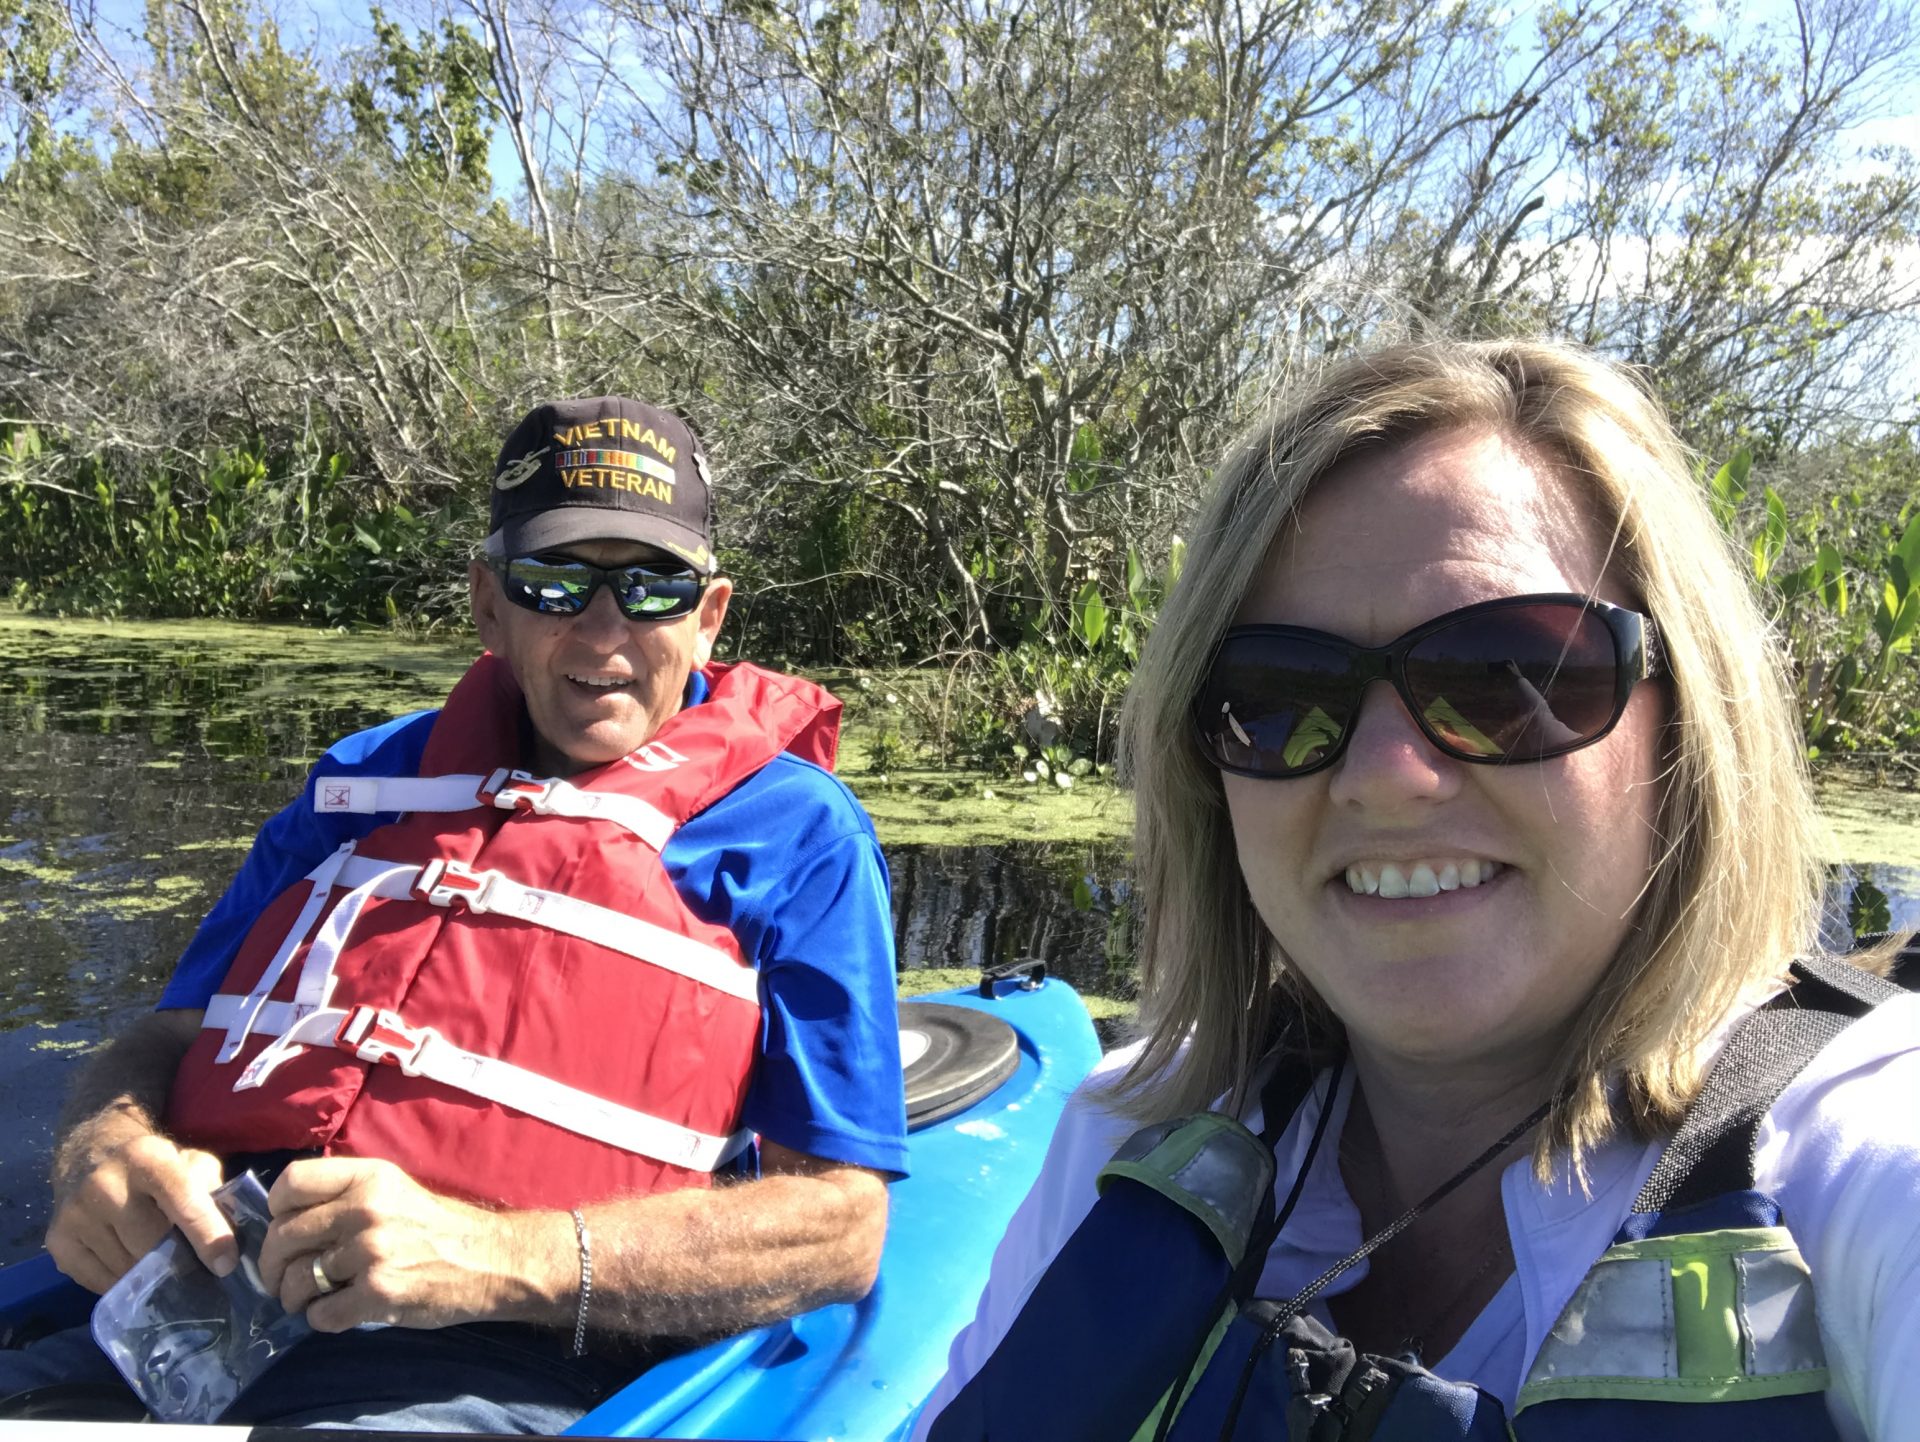 Dad I’m so glad I pushed through my fear to kayak with the alligators, I had a great day kayaking with you. ❤️ You daughter Shannon